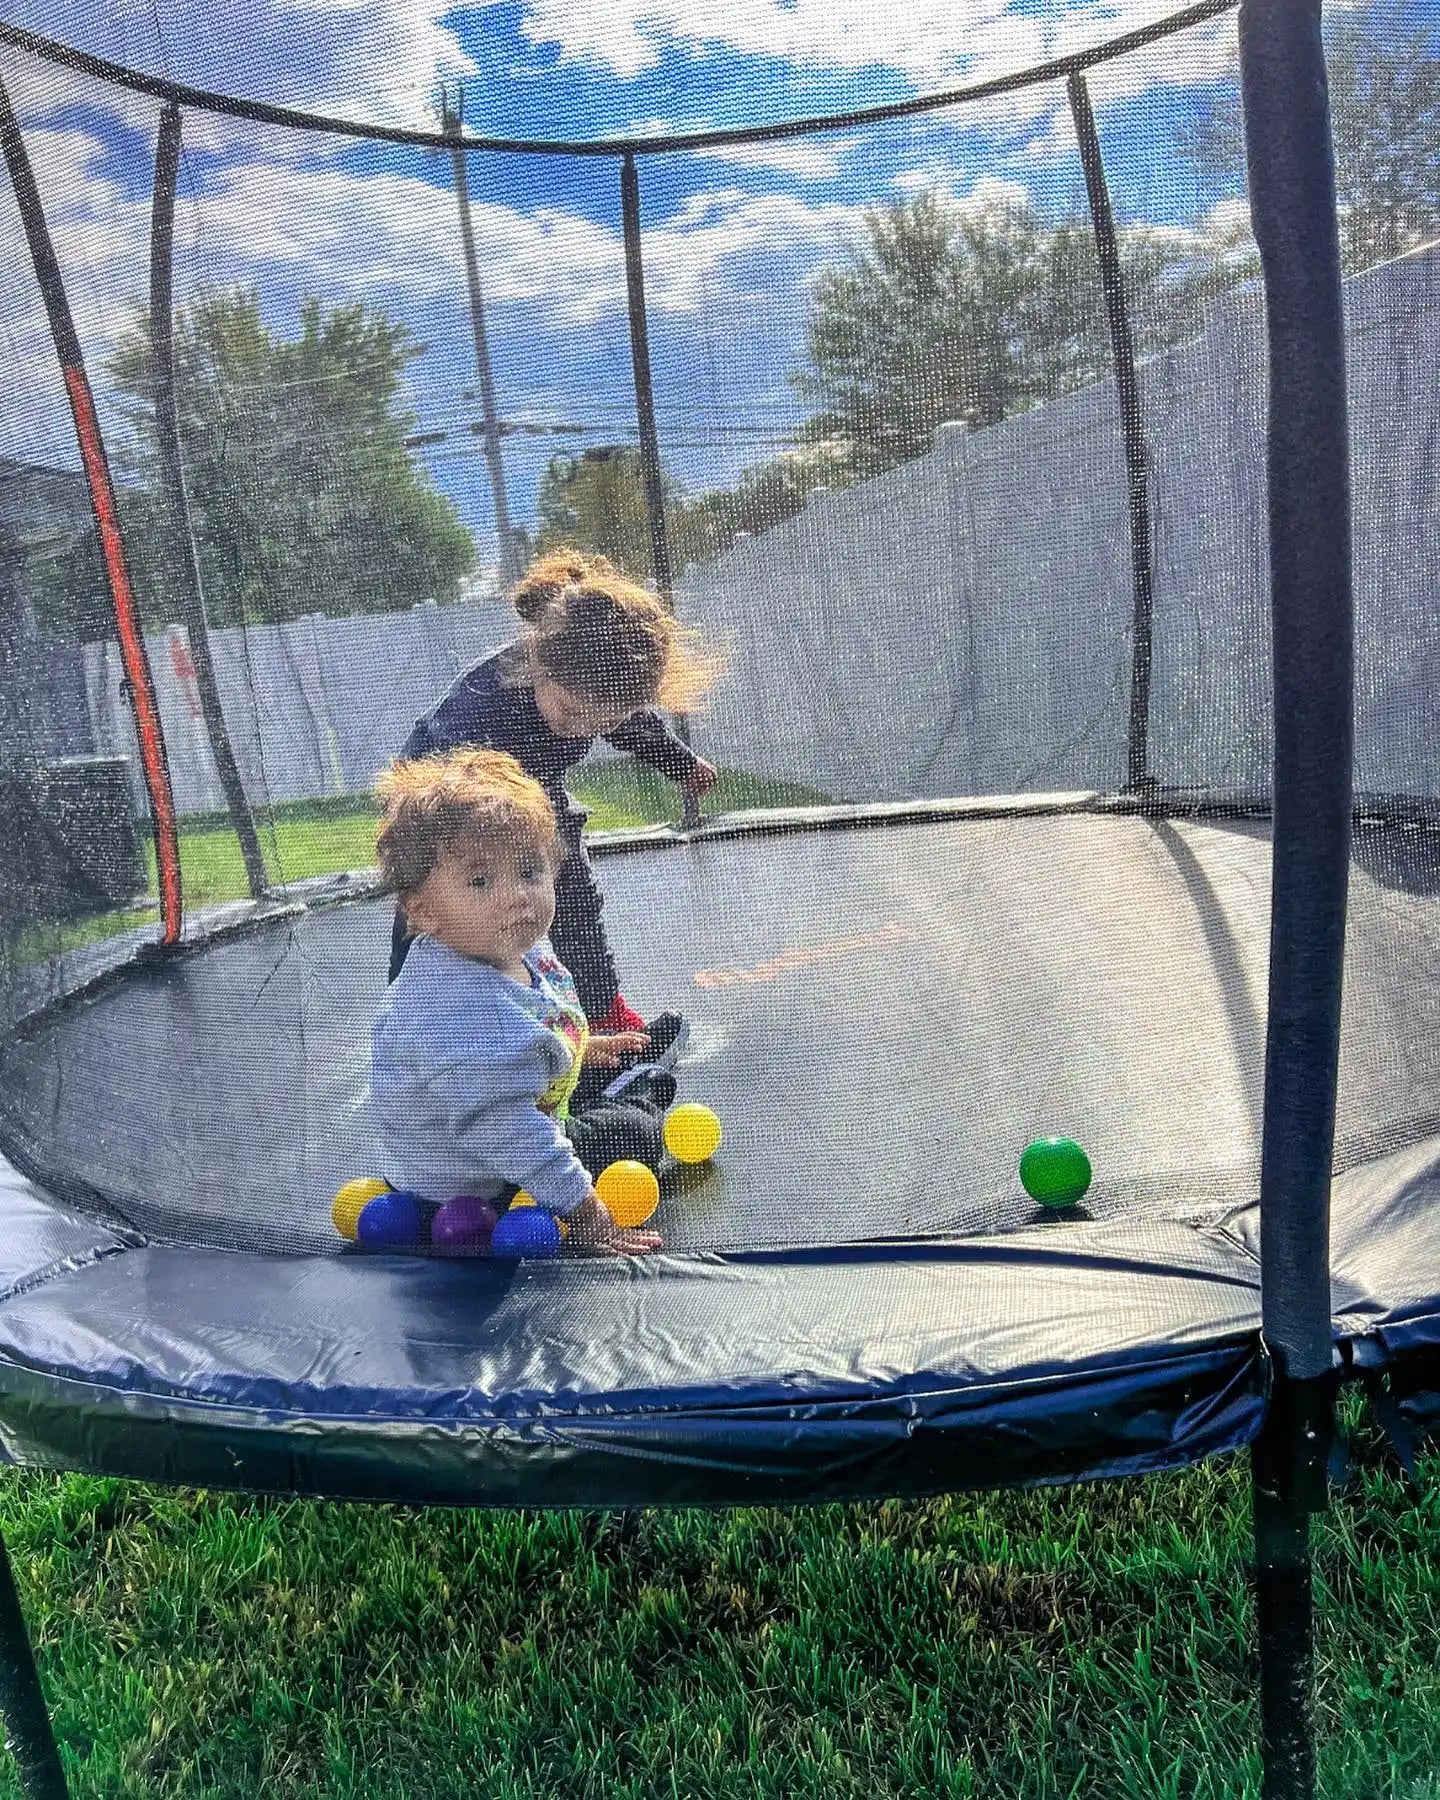 14FT Trampoline with Basketball Hoop - Top Pick